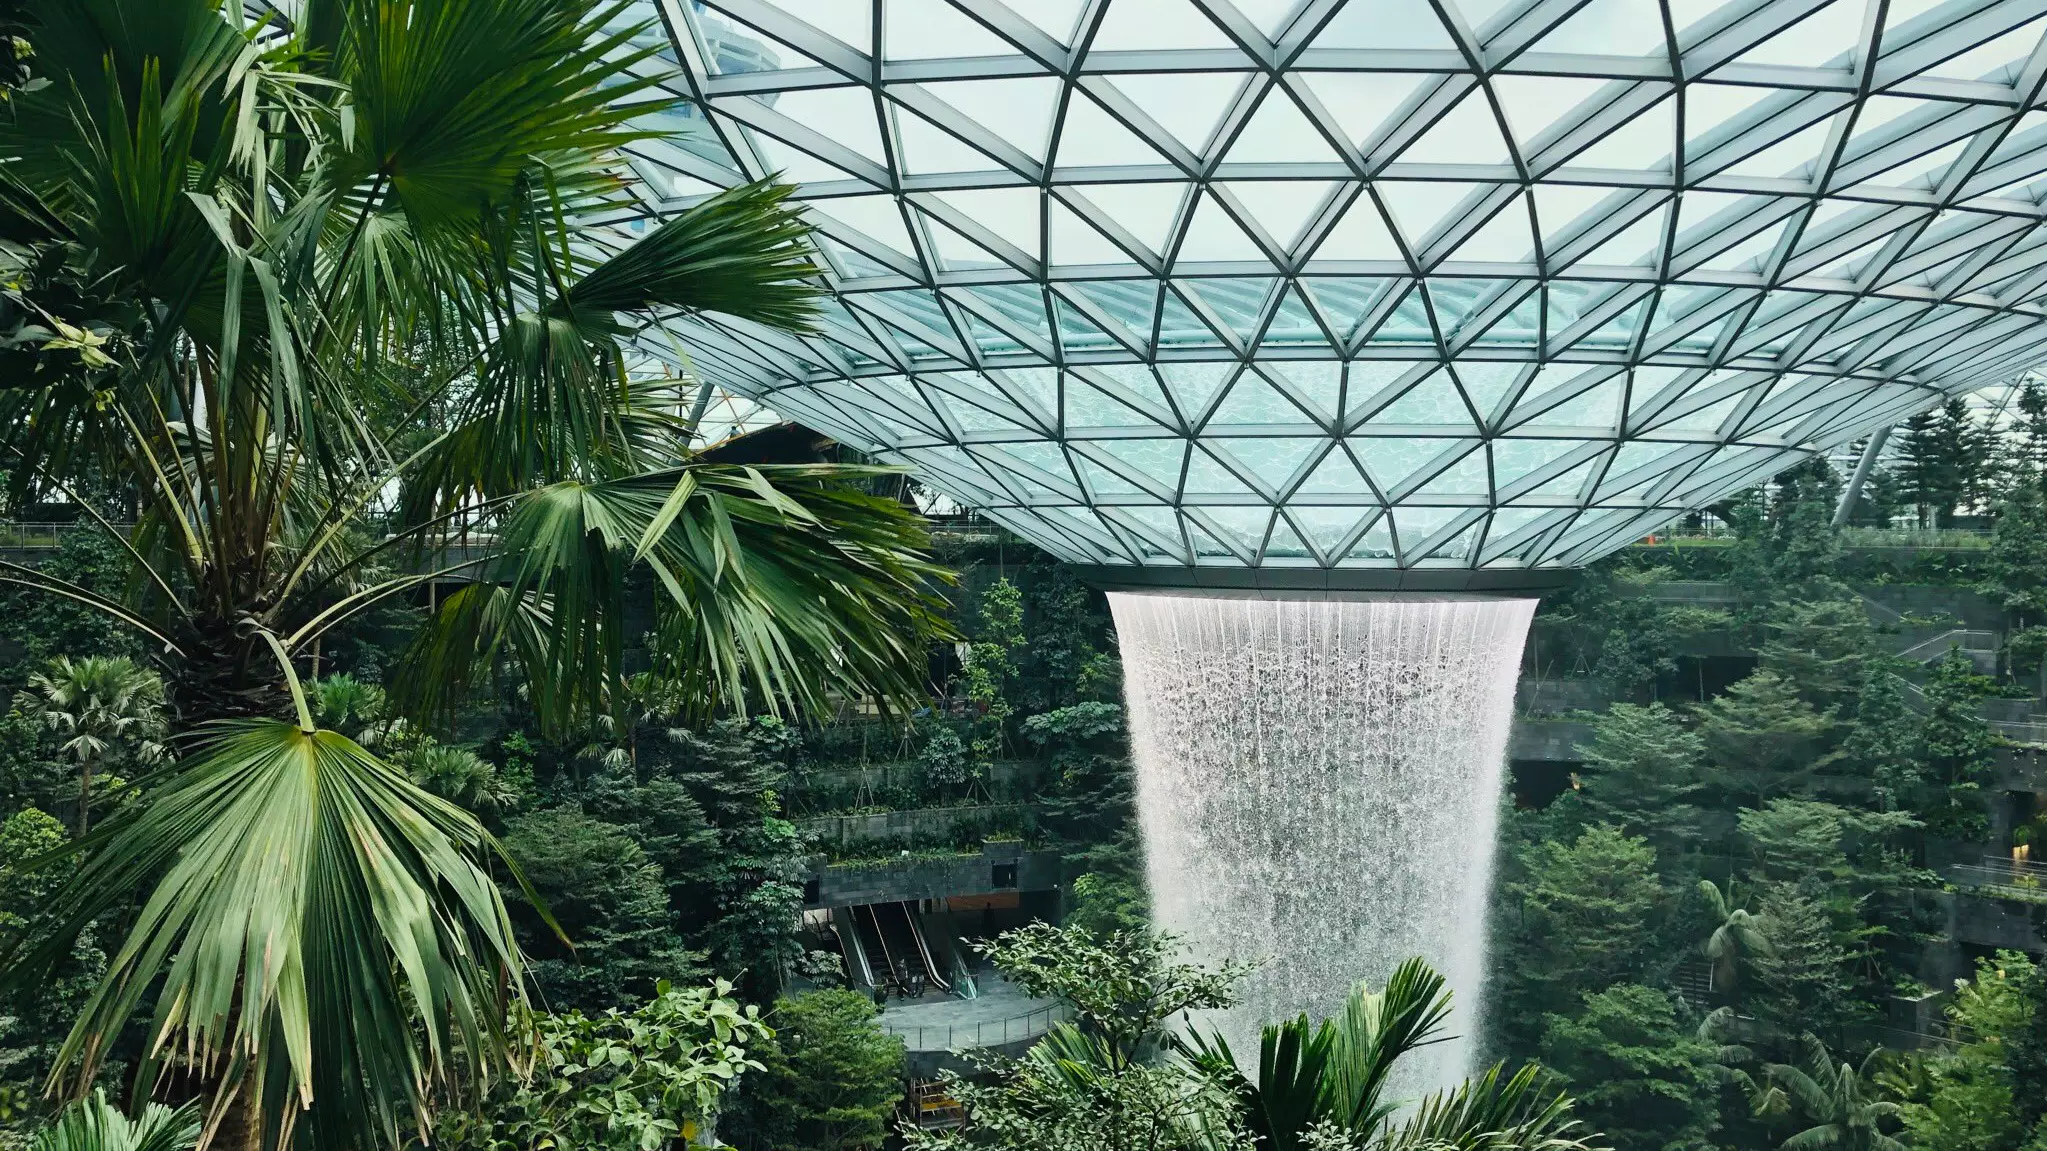 The World's Best Airport Is Revealed And It's Got An Indoor Rainforest 